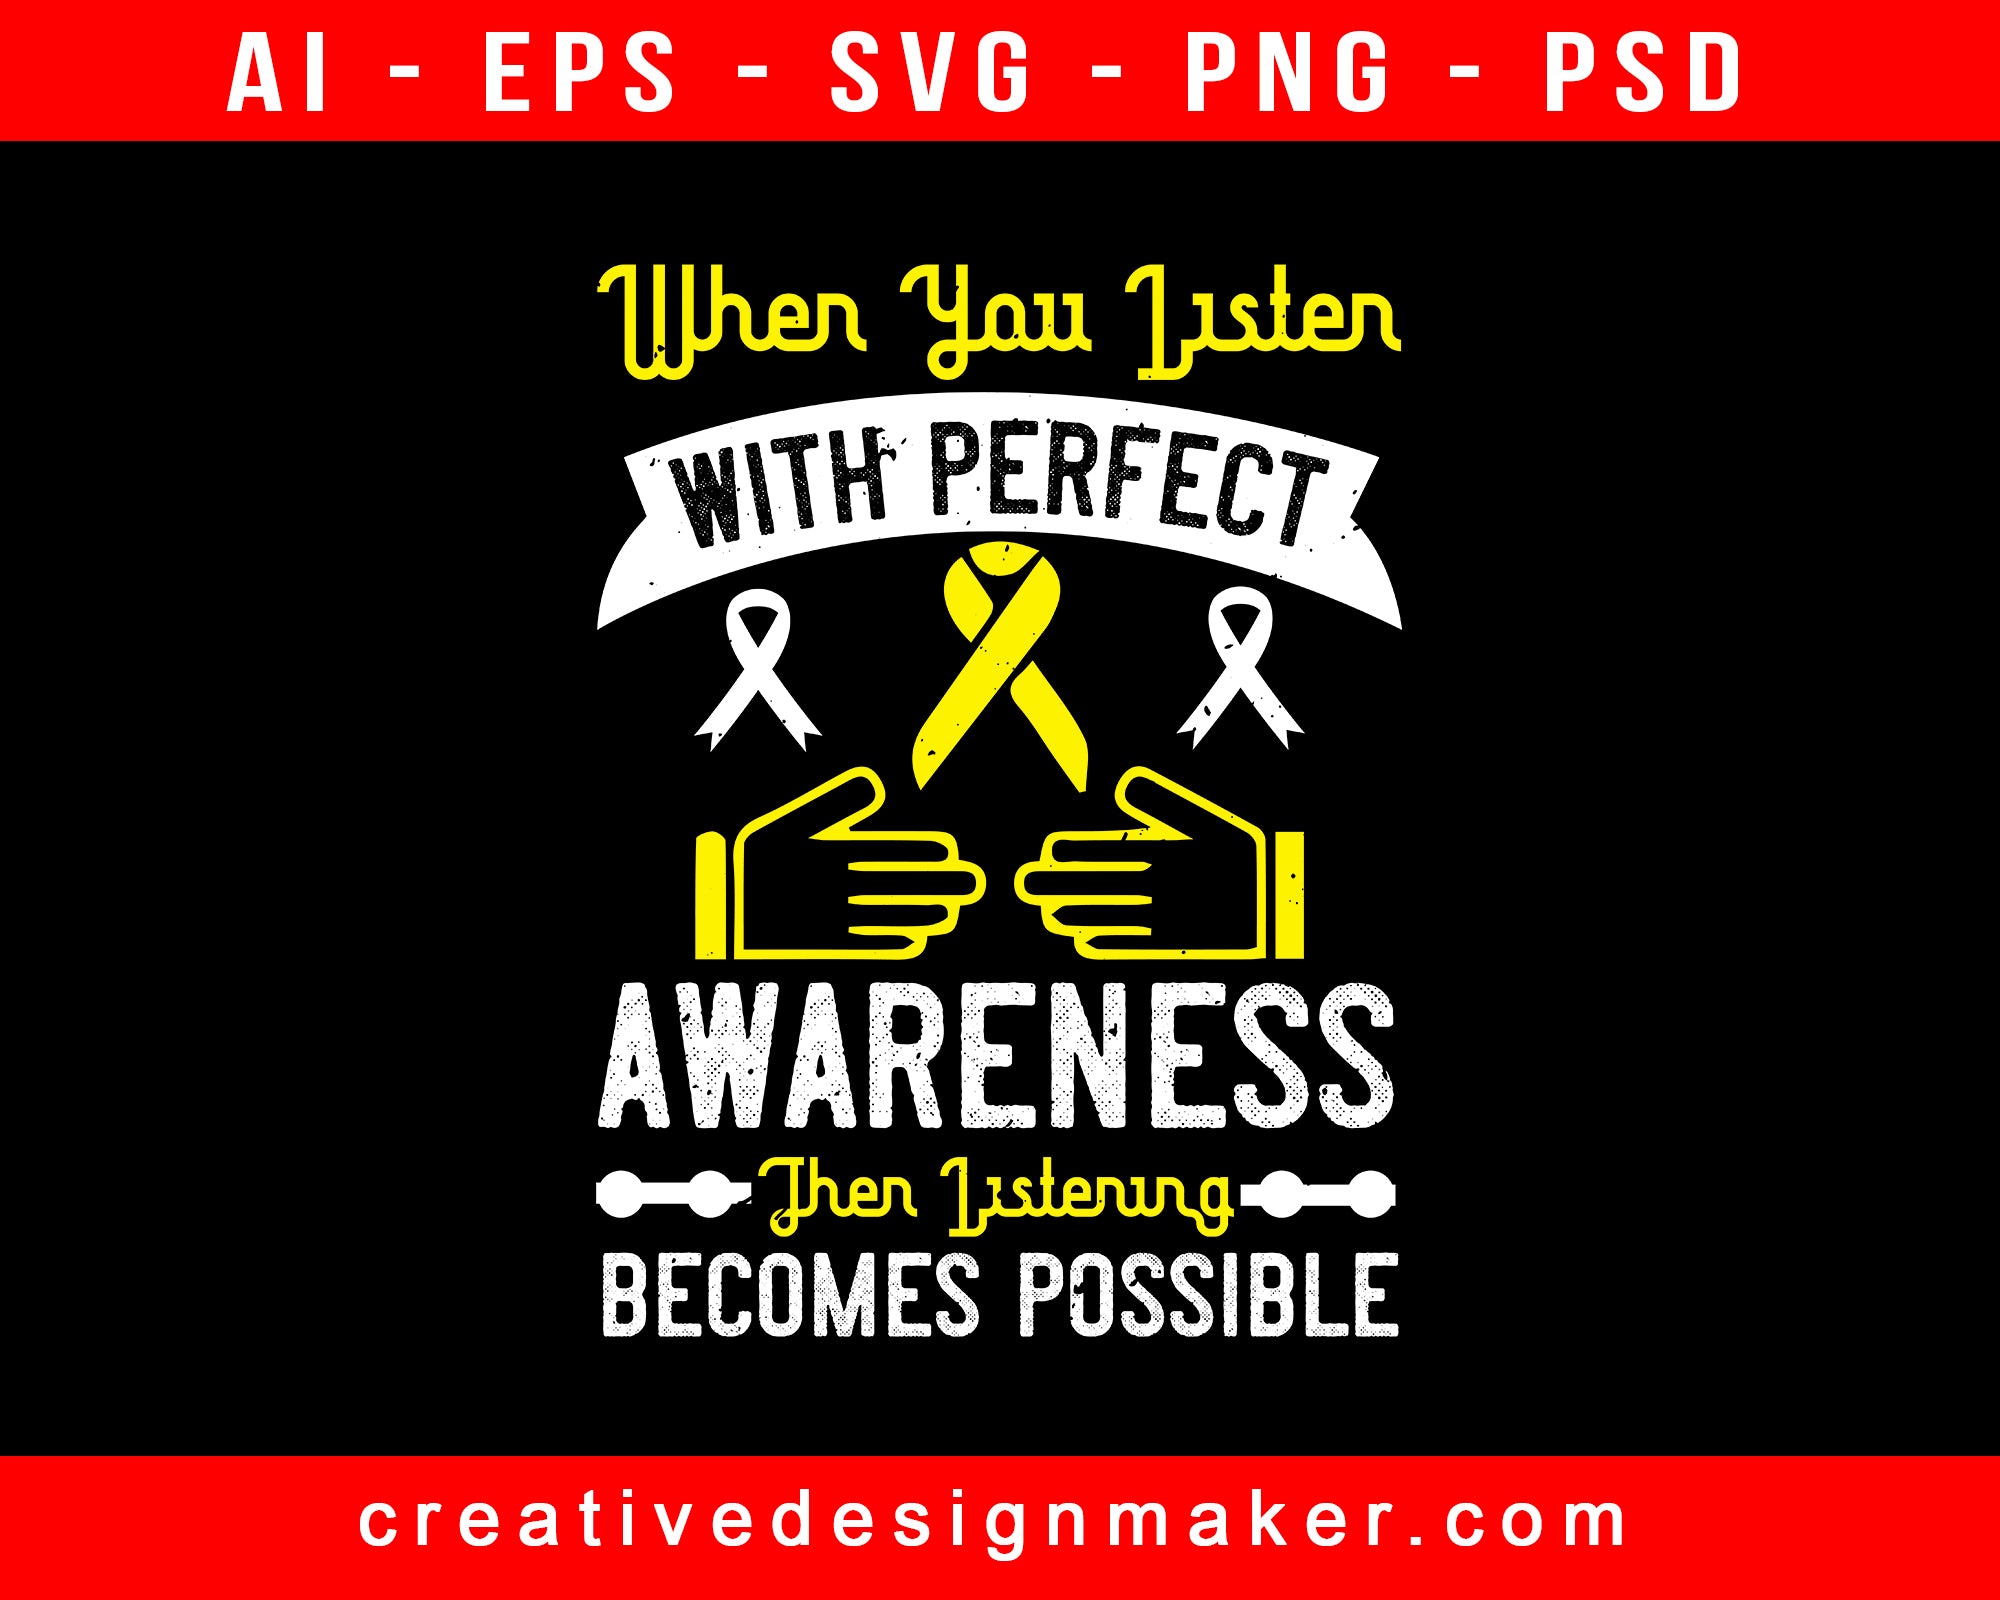 When You Listen With Perfect Awareness, Then Listening Becomes Possible Print Ready Editable T-Shirt SVG Design!